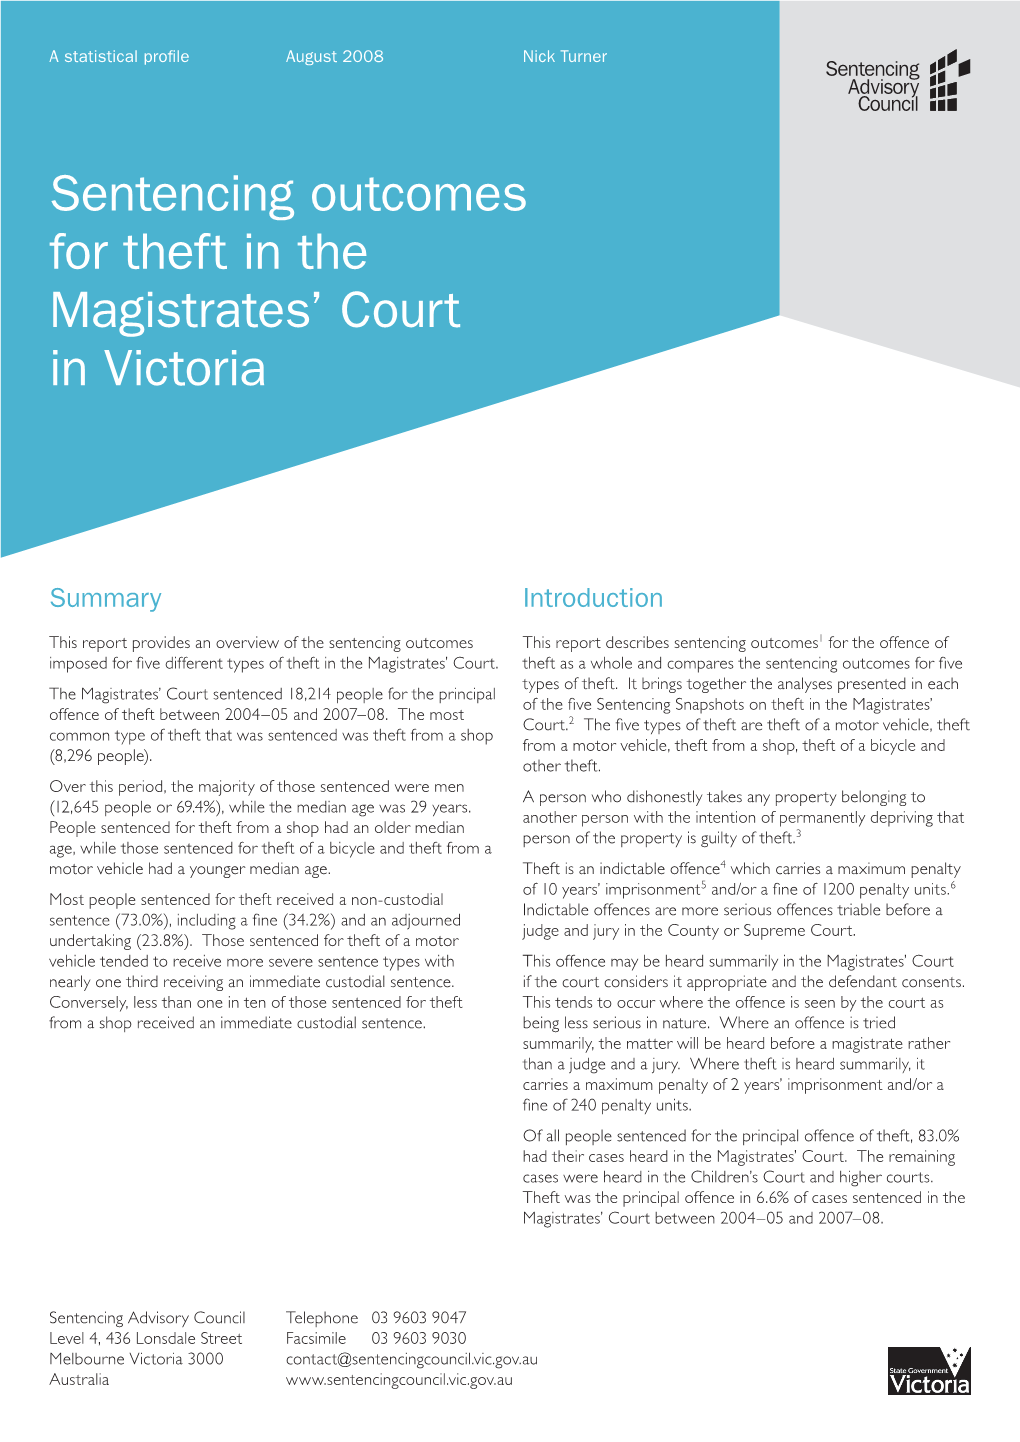 Sentencing Outcomes for Theft in the Magistrates’ Court in Victoria